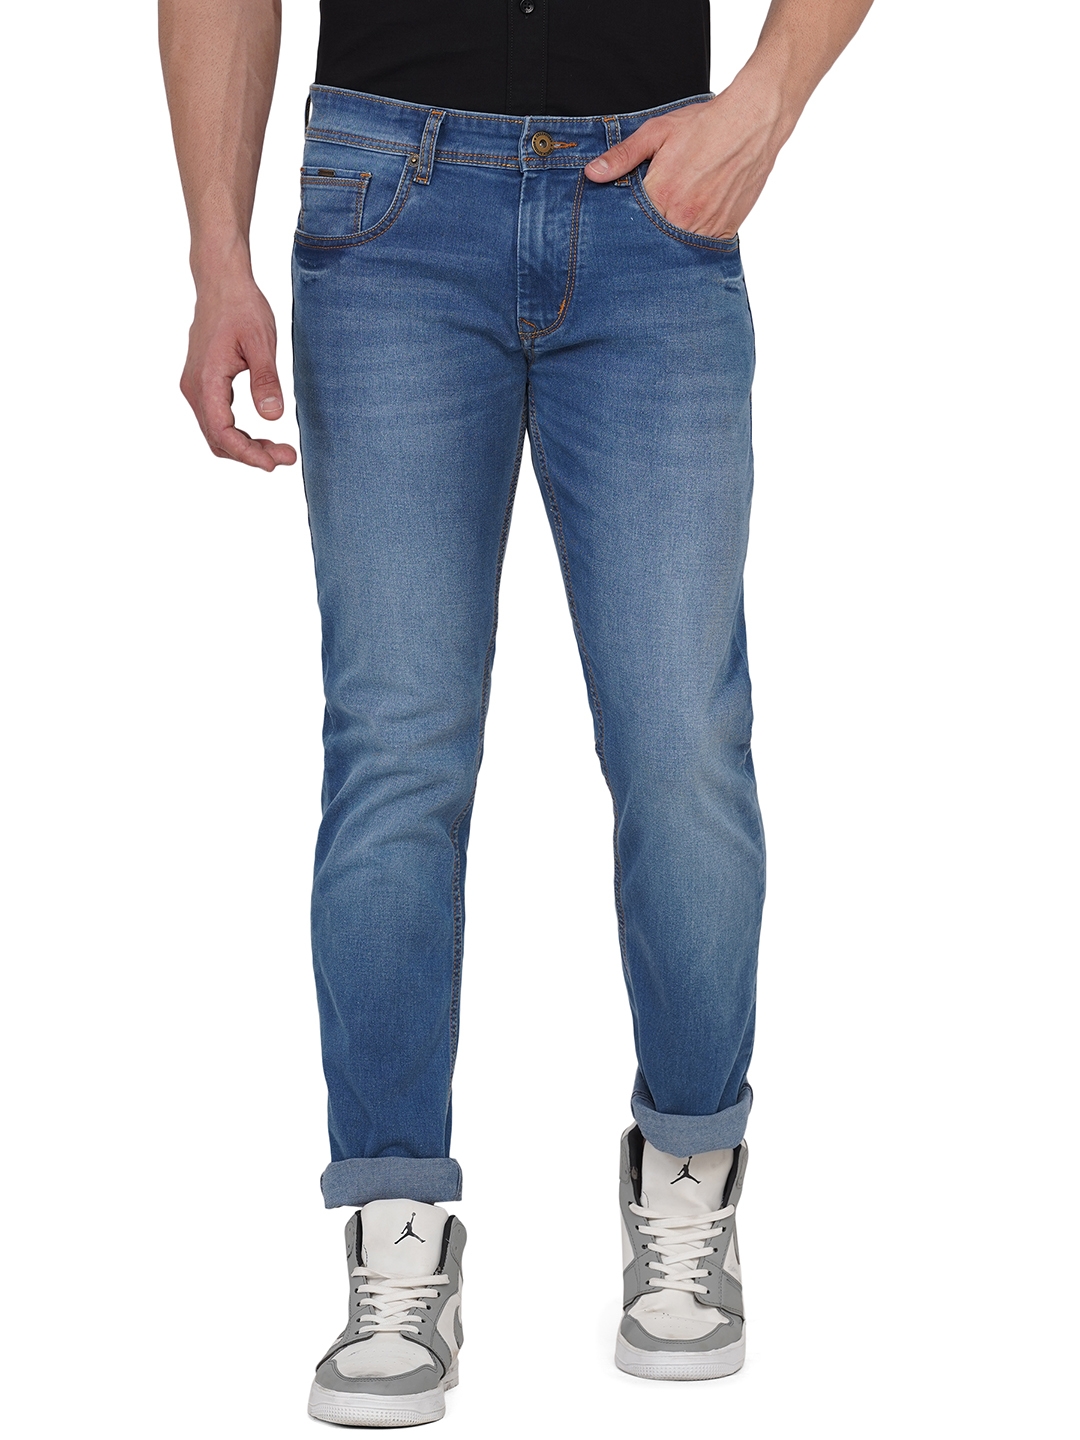 Greenfibre | River Blue Washed Straight Fit Jeans | Greenfibre